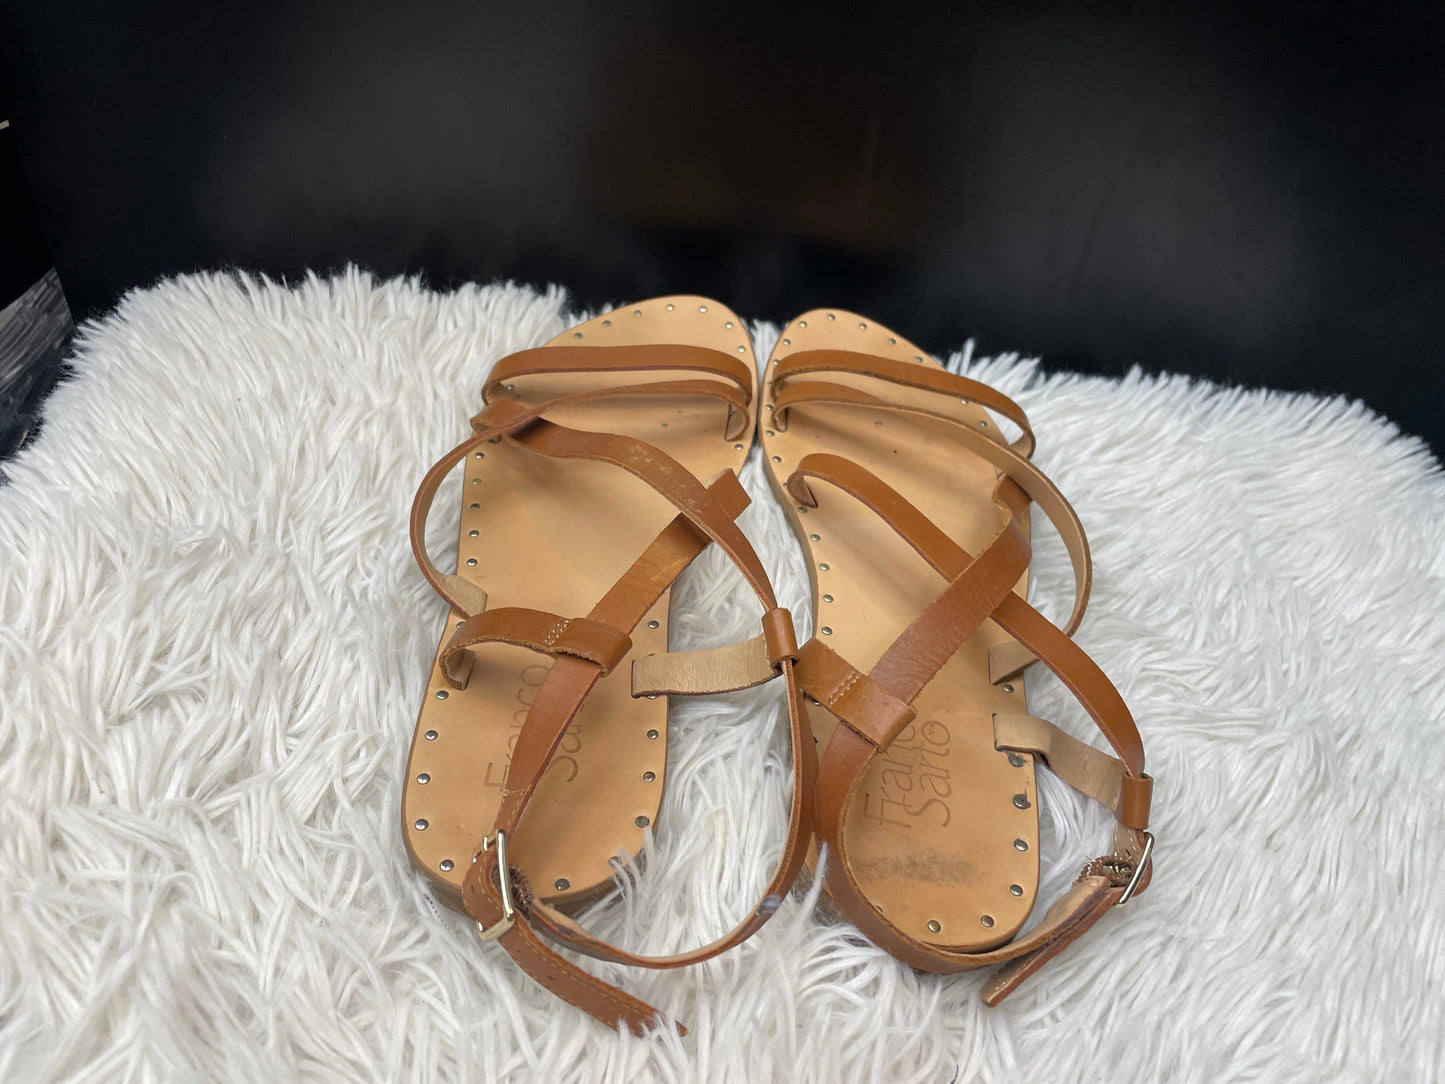 Sandals Flats By Franco Sarto  Size: 8